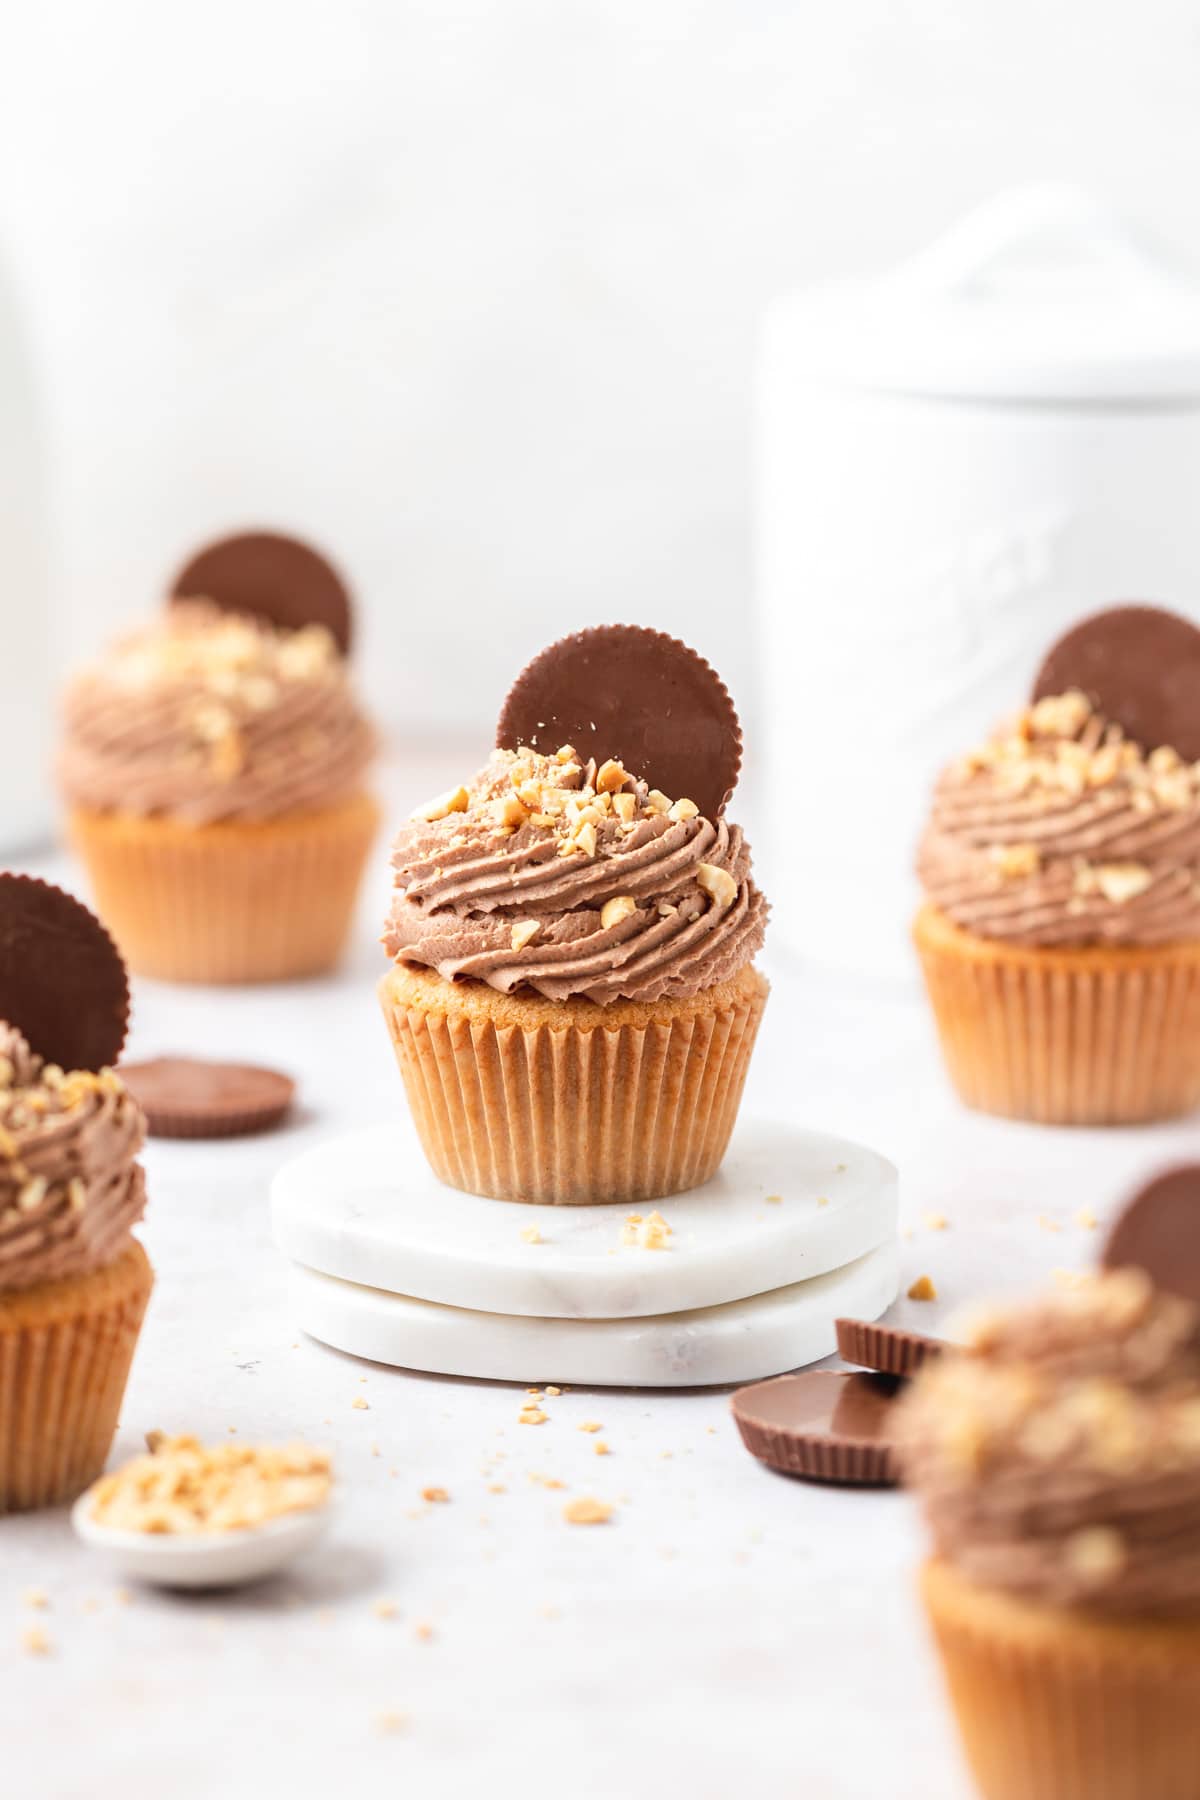 chocolate peanut butter cupcakes with crushed peanuts.